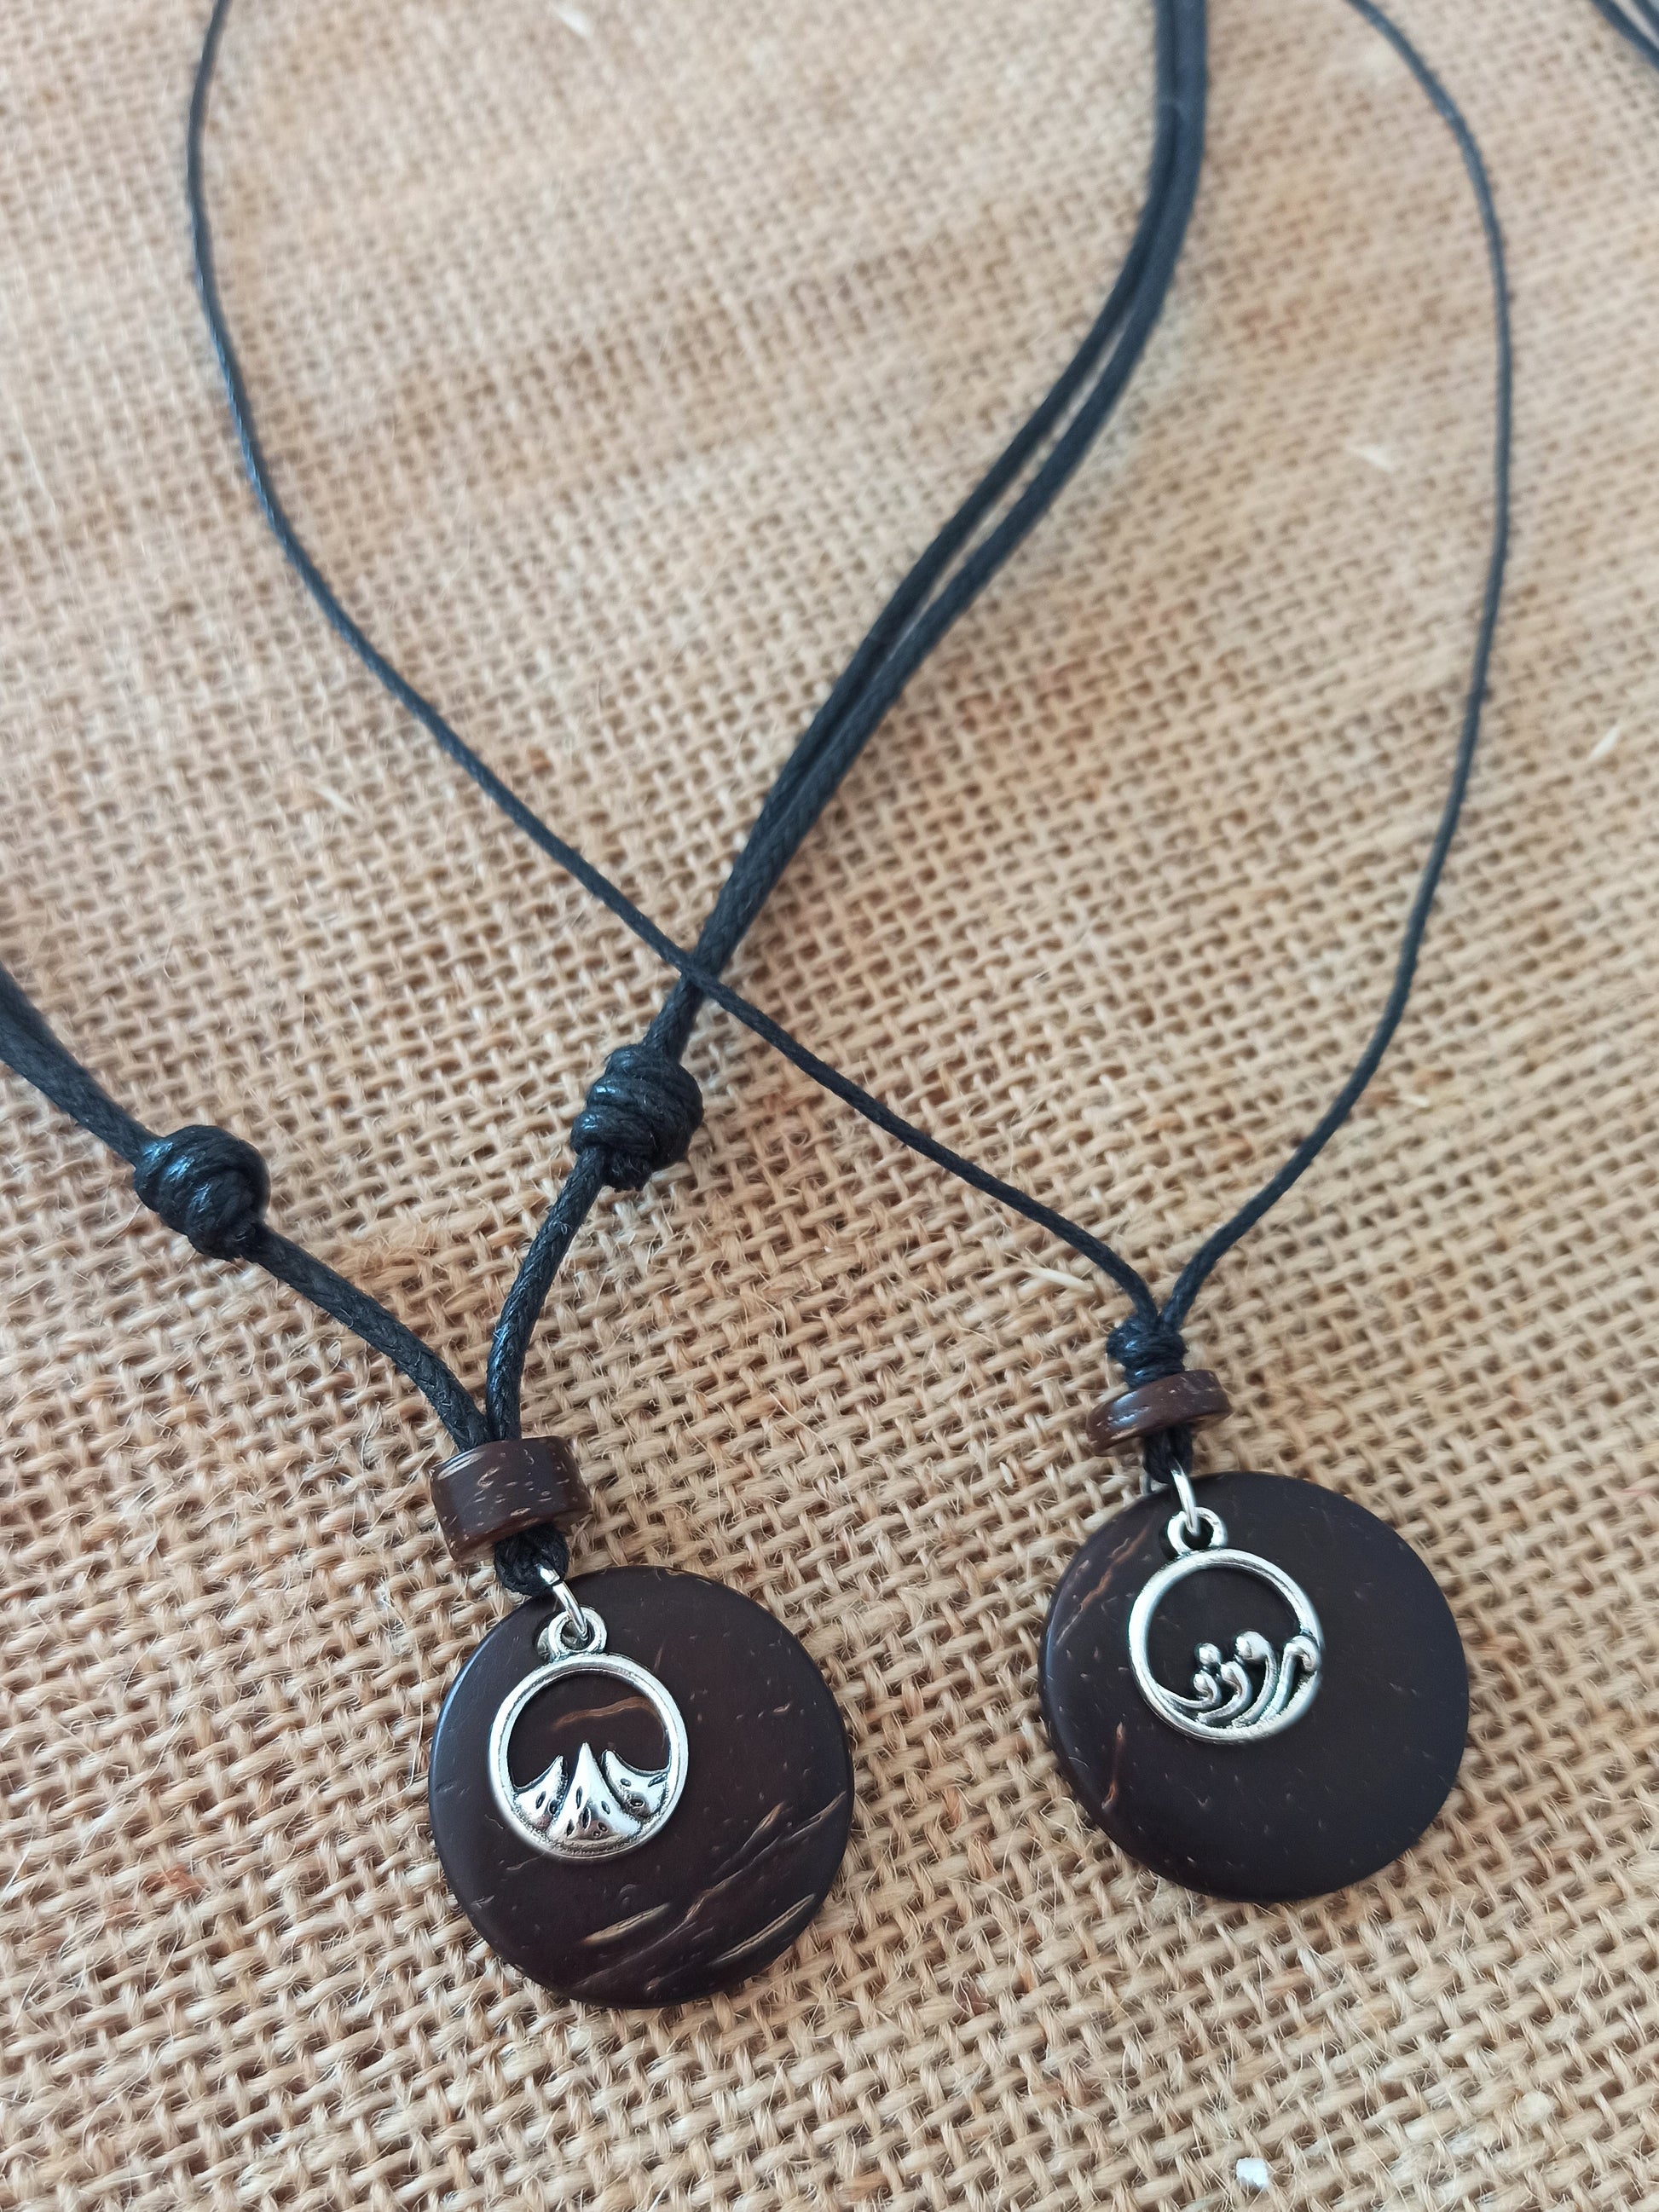 Mountain And Wave Coconut Shell Pendant Necklace His and Hers necklaces